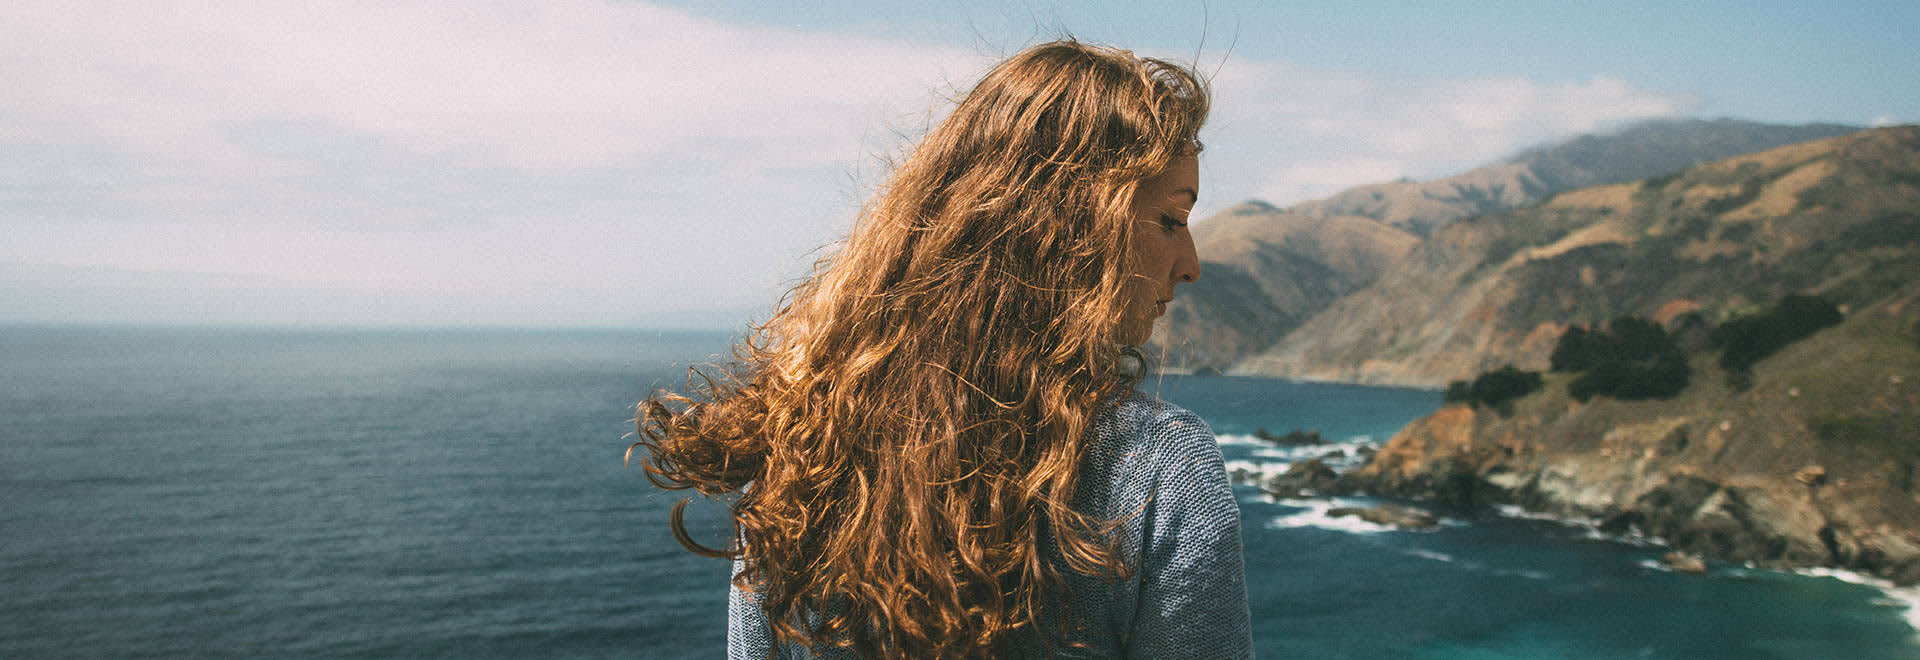 A photo of a woman with long wavy red hair looking over her shoulder on the side - mountains and ocean in the background